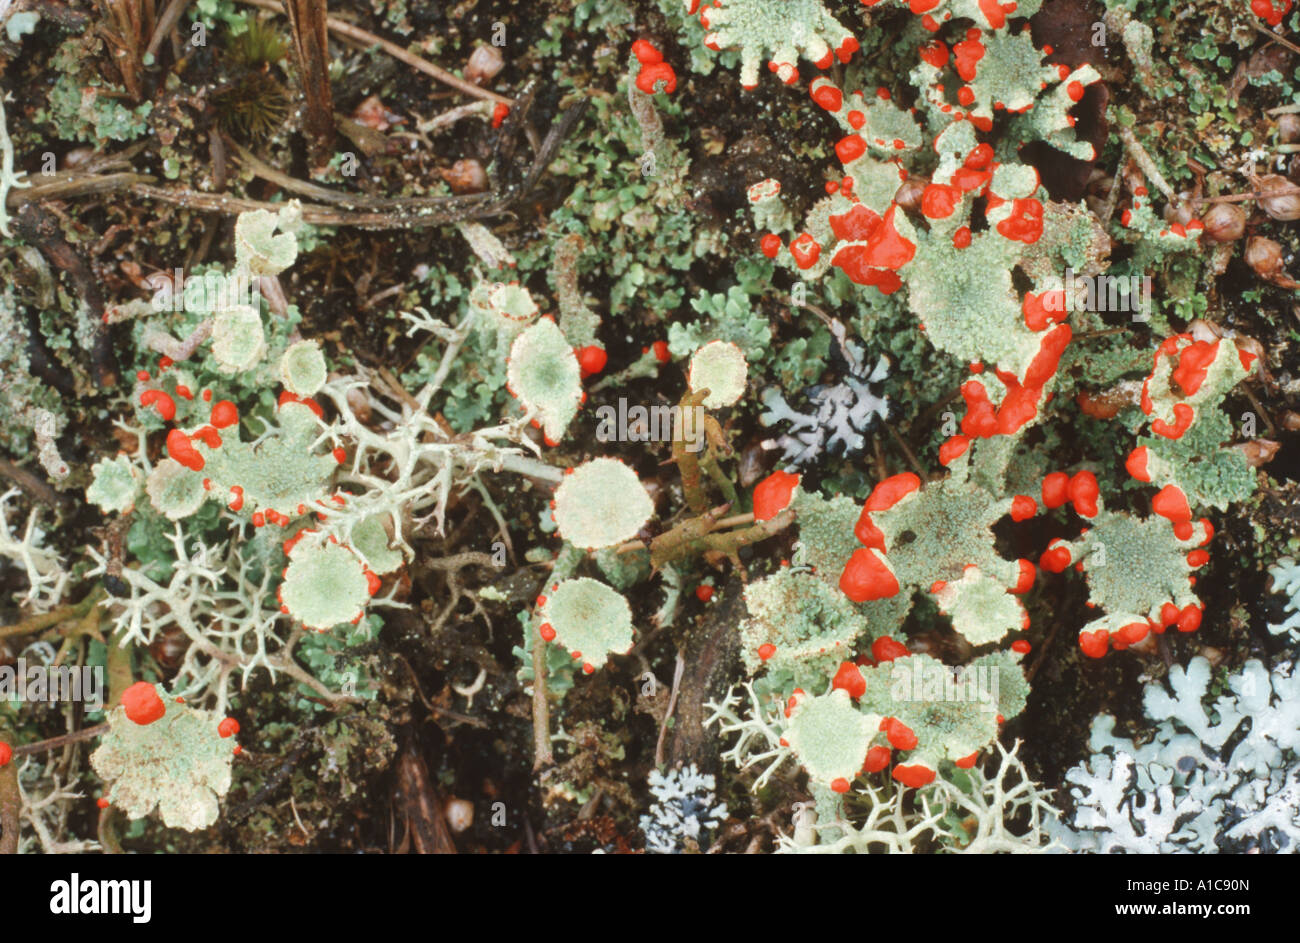 cladonia (Cladonia polydactyla), with red fruit bodies Stock Photo